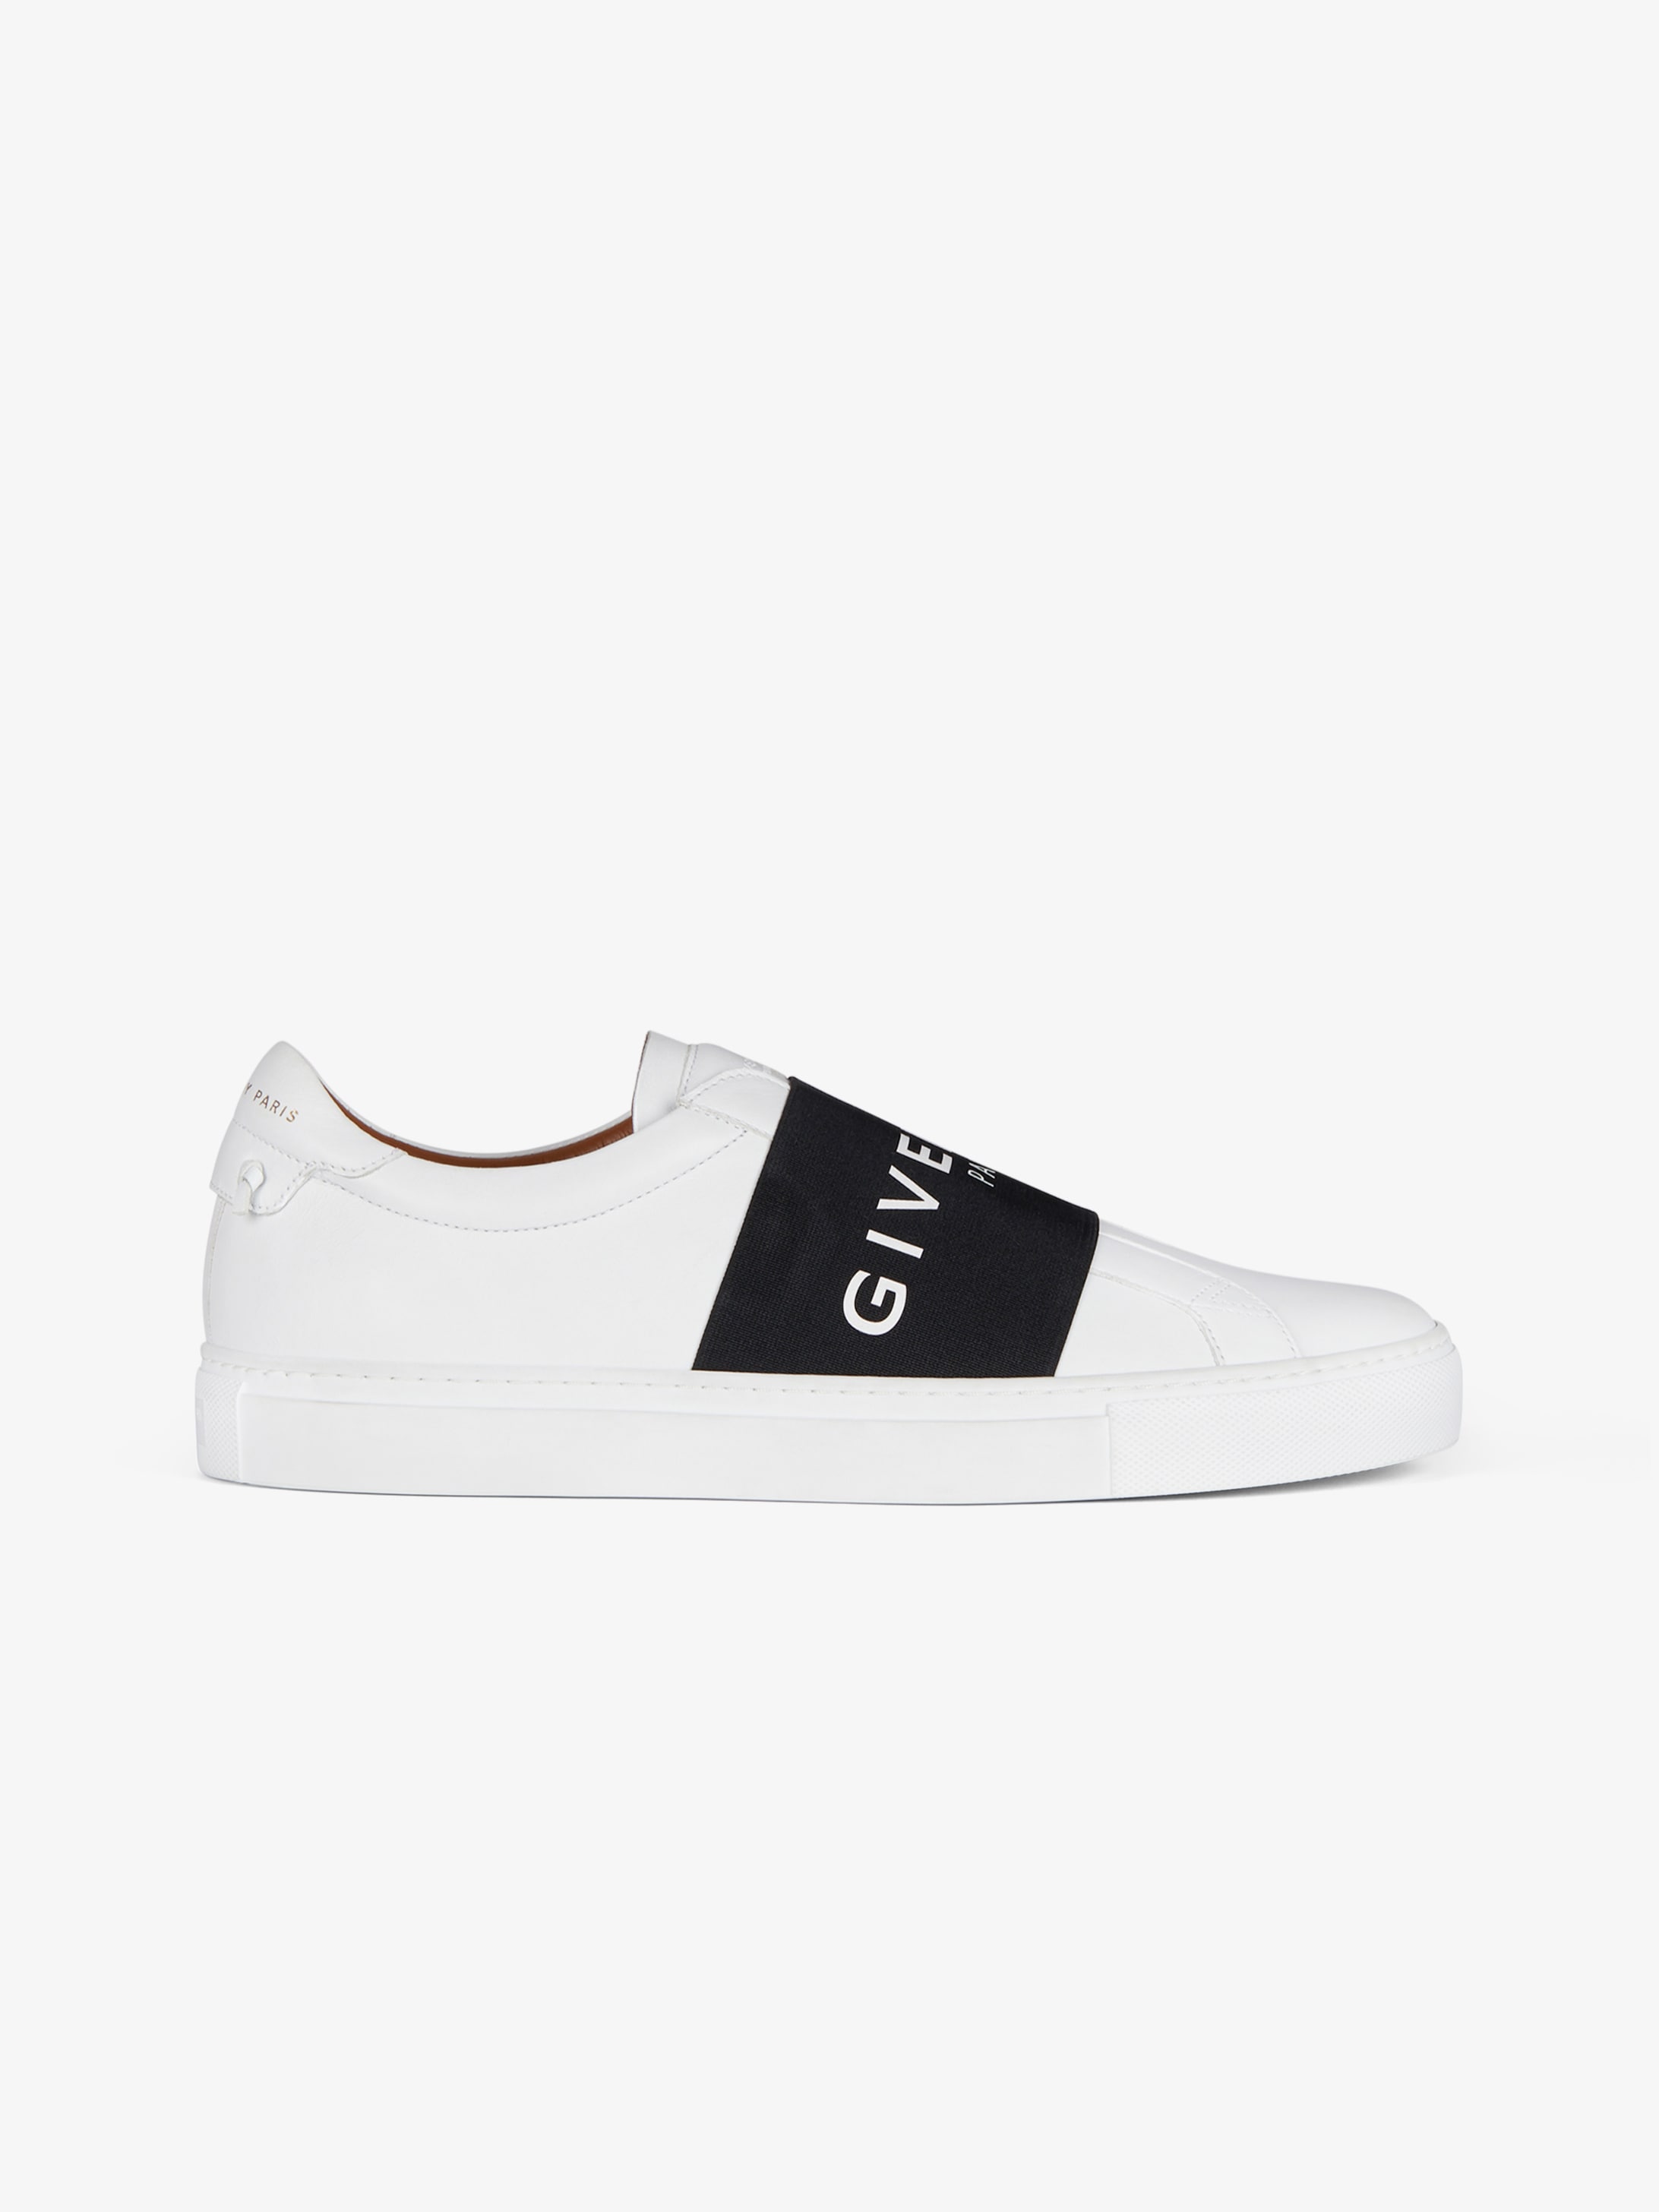 givenchy urban street sneakers sizing